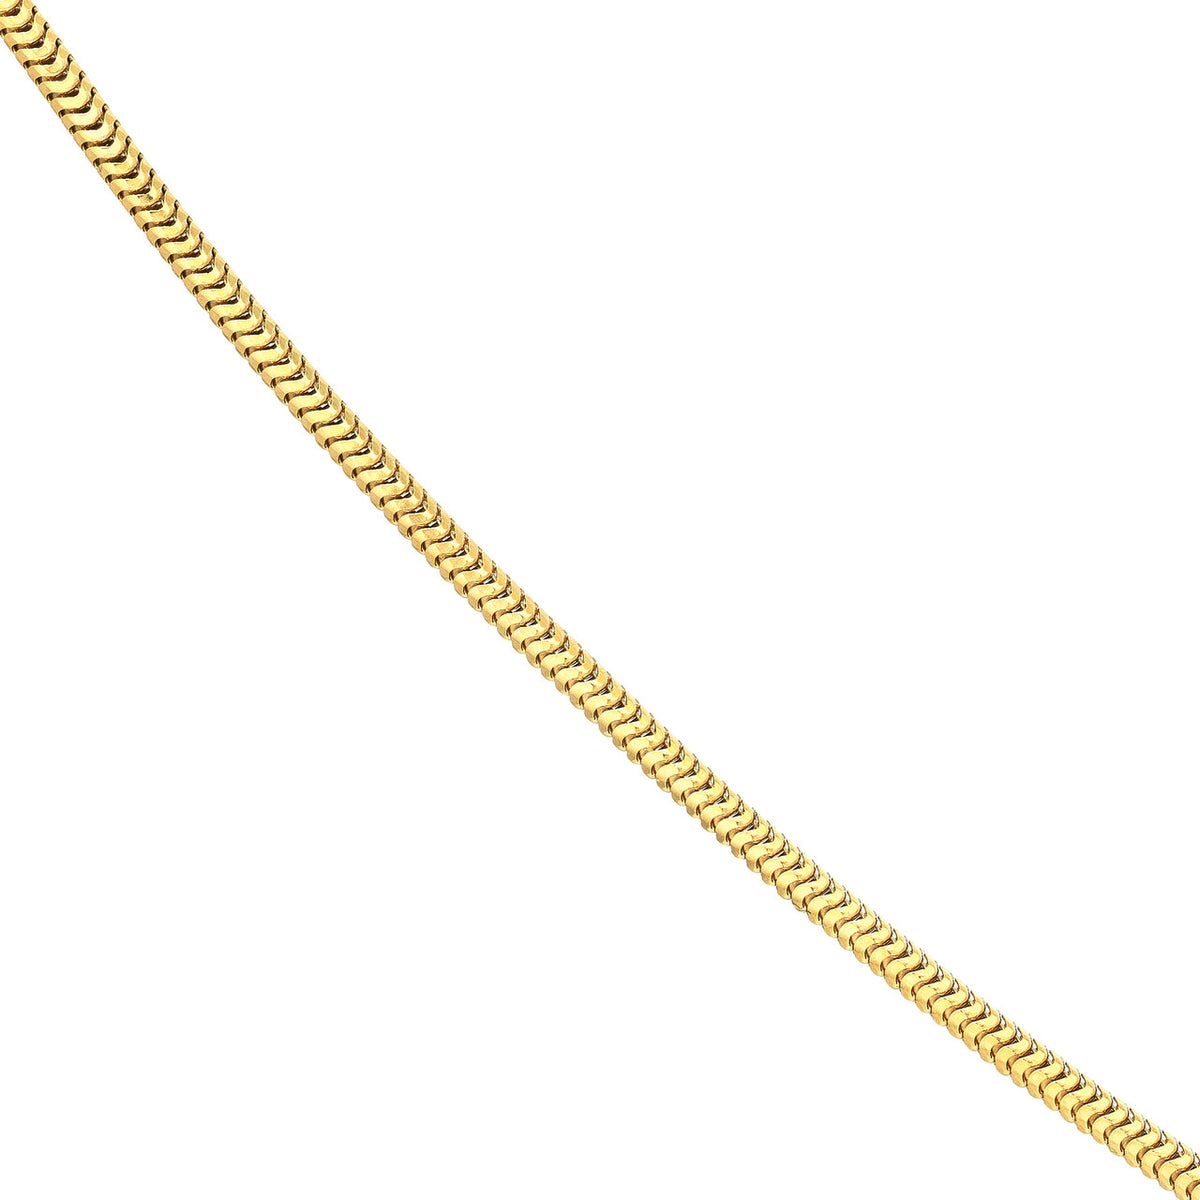 14K Yellow Gold or White Gold 1.6mm Snake Chain Necklace with Lobster Lock